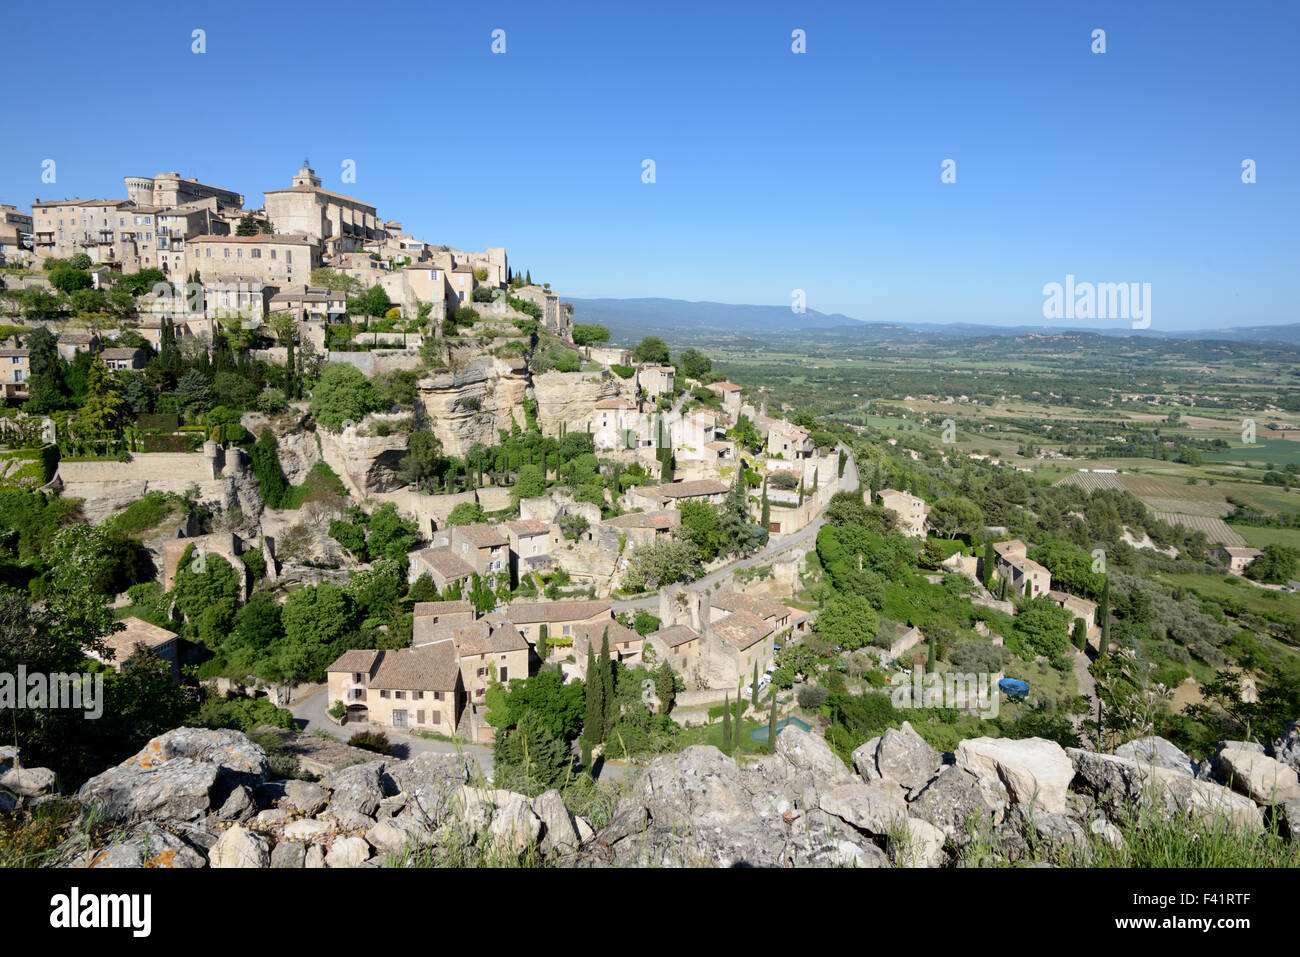 View over the Perched Hilltop Village of Gordes in the Luberon Regional Park Vaucluse Provence France Stock Photo